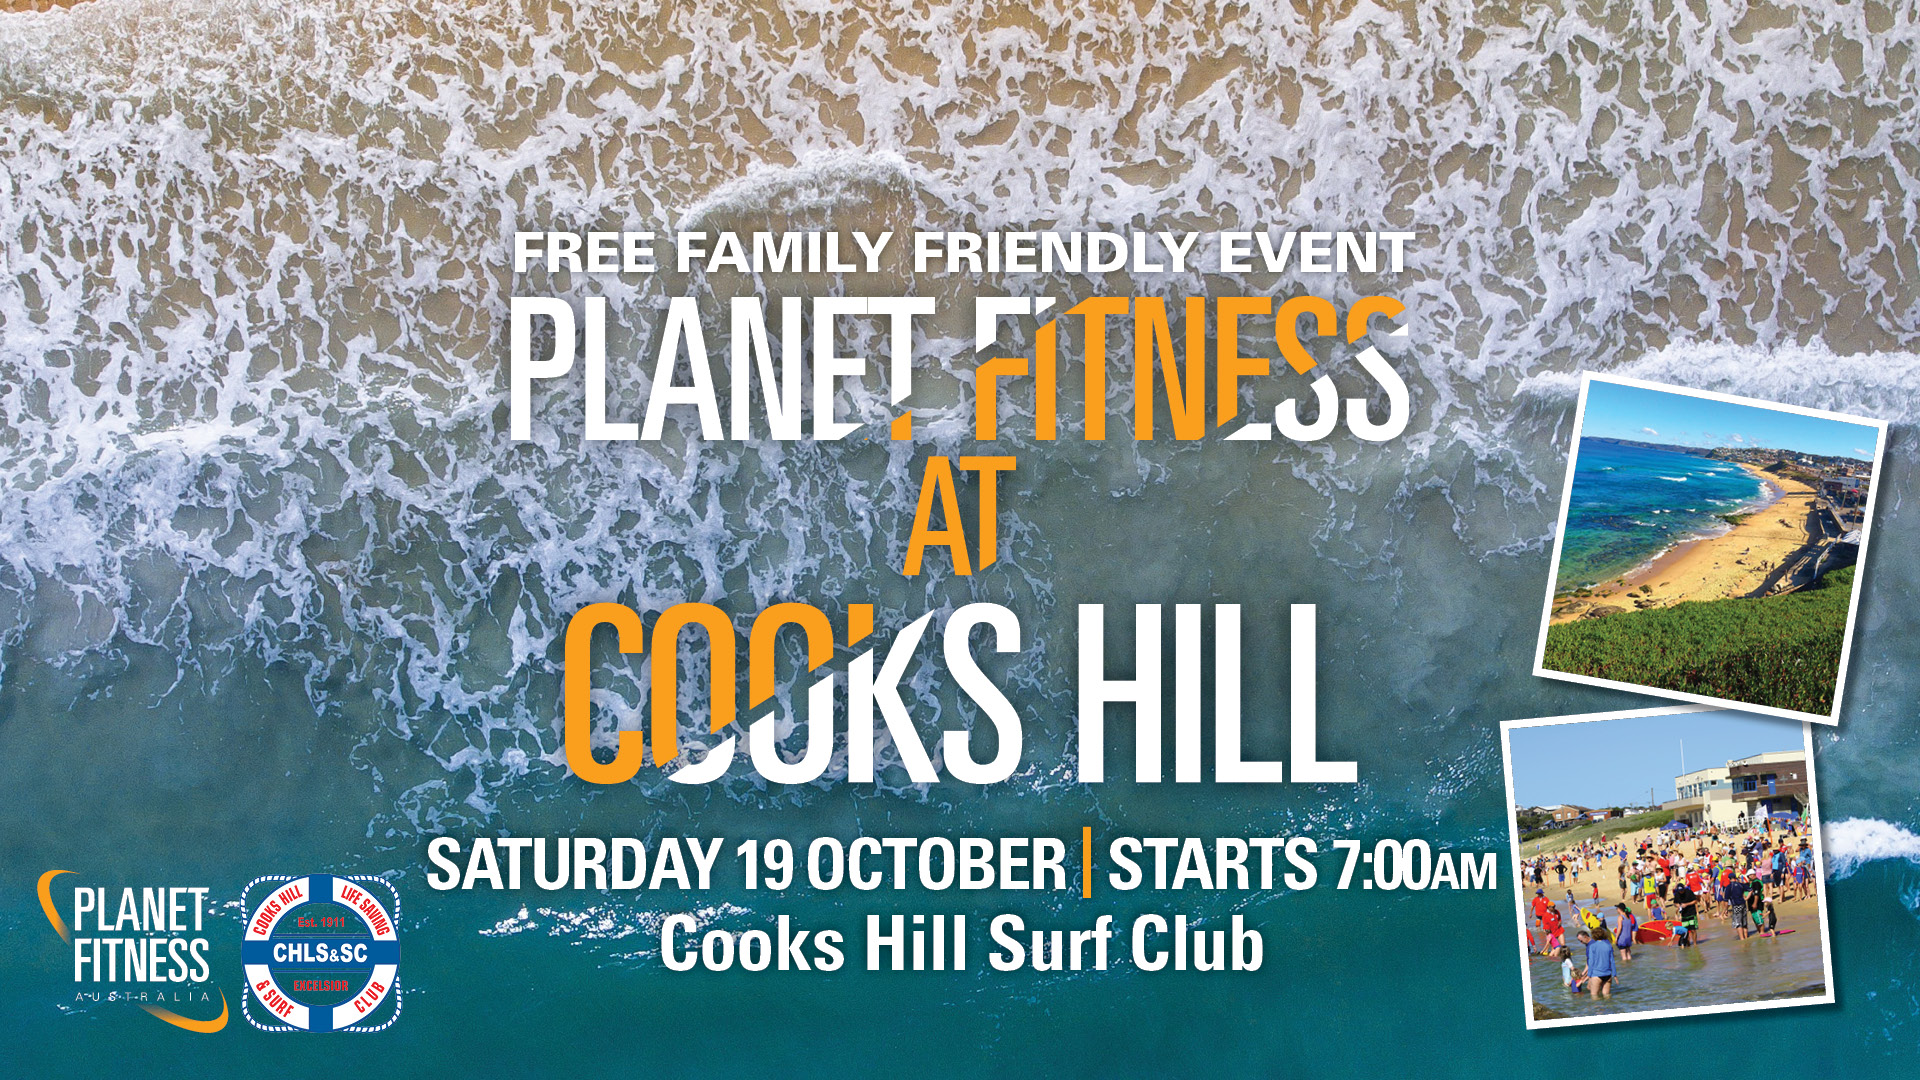 Planet Fitness at Cooks Hill event